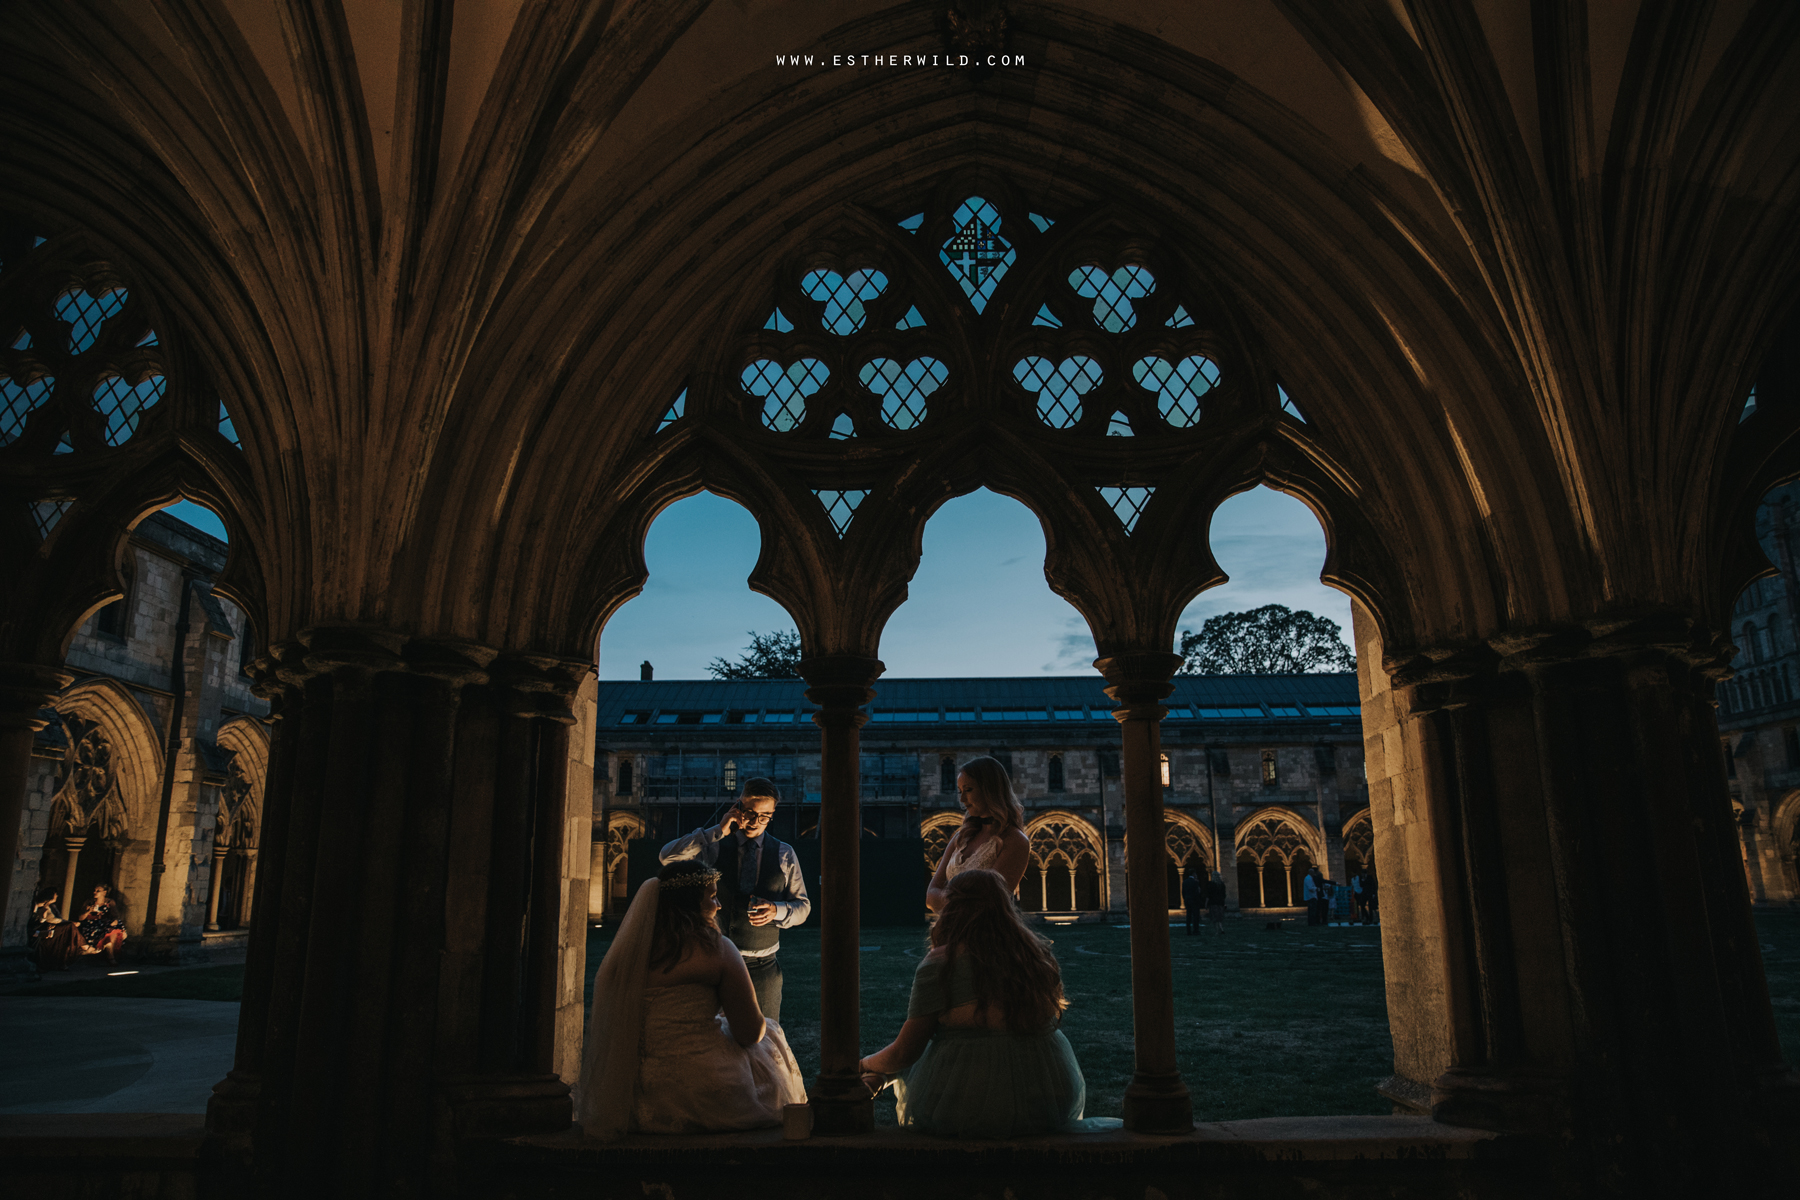 Norwich_Castle_Arcade_Grosvenor_Chip_Birdcage_Cathedral_Cloisters_Refectory_Wedding_Photography_Esther_Wild_Photographer_Norfolk_Kings_Lynn_3R8A3157.jpg